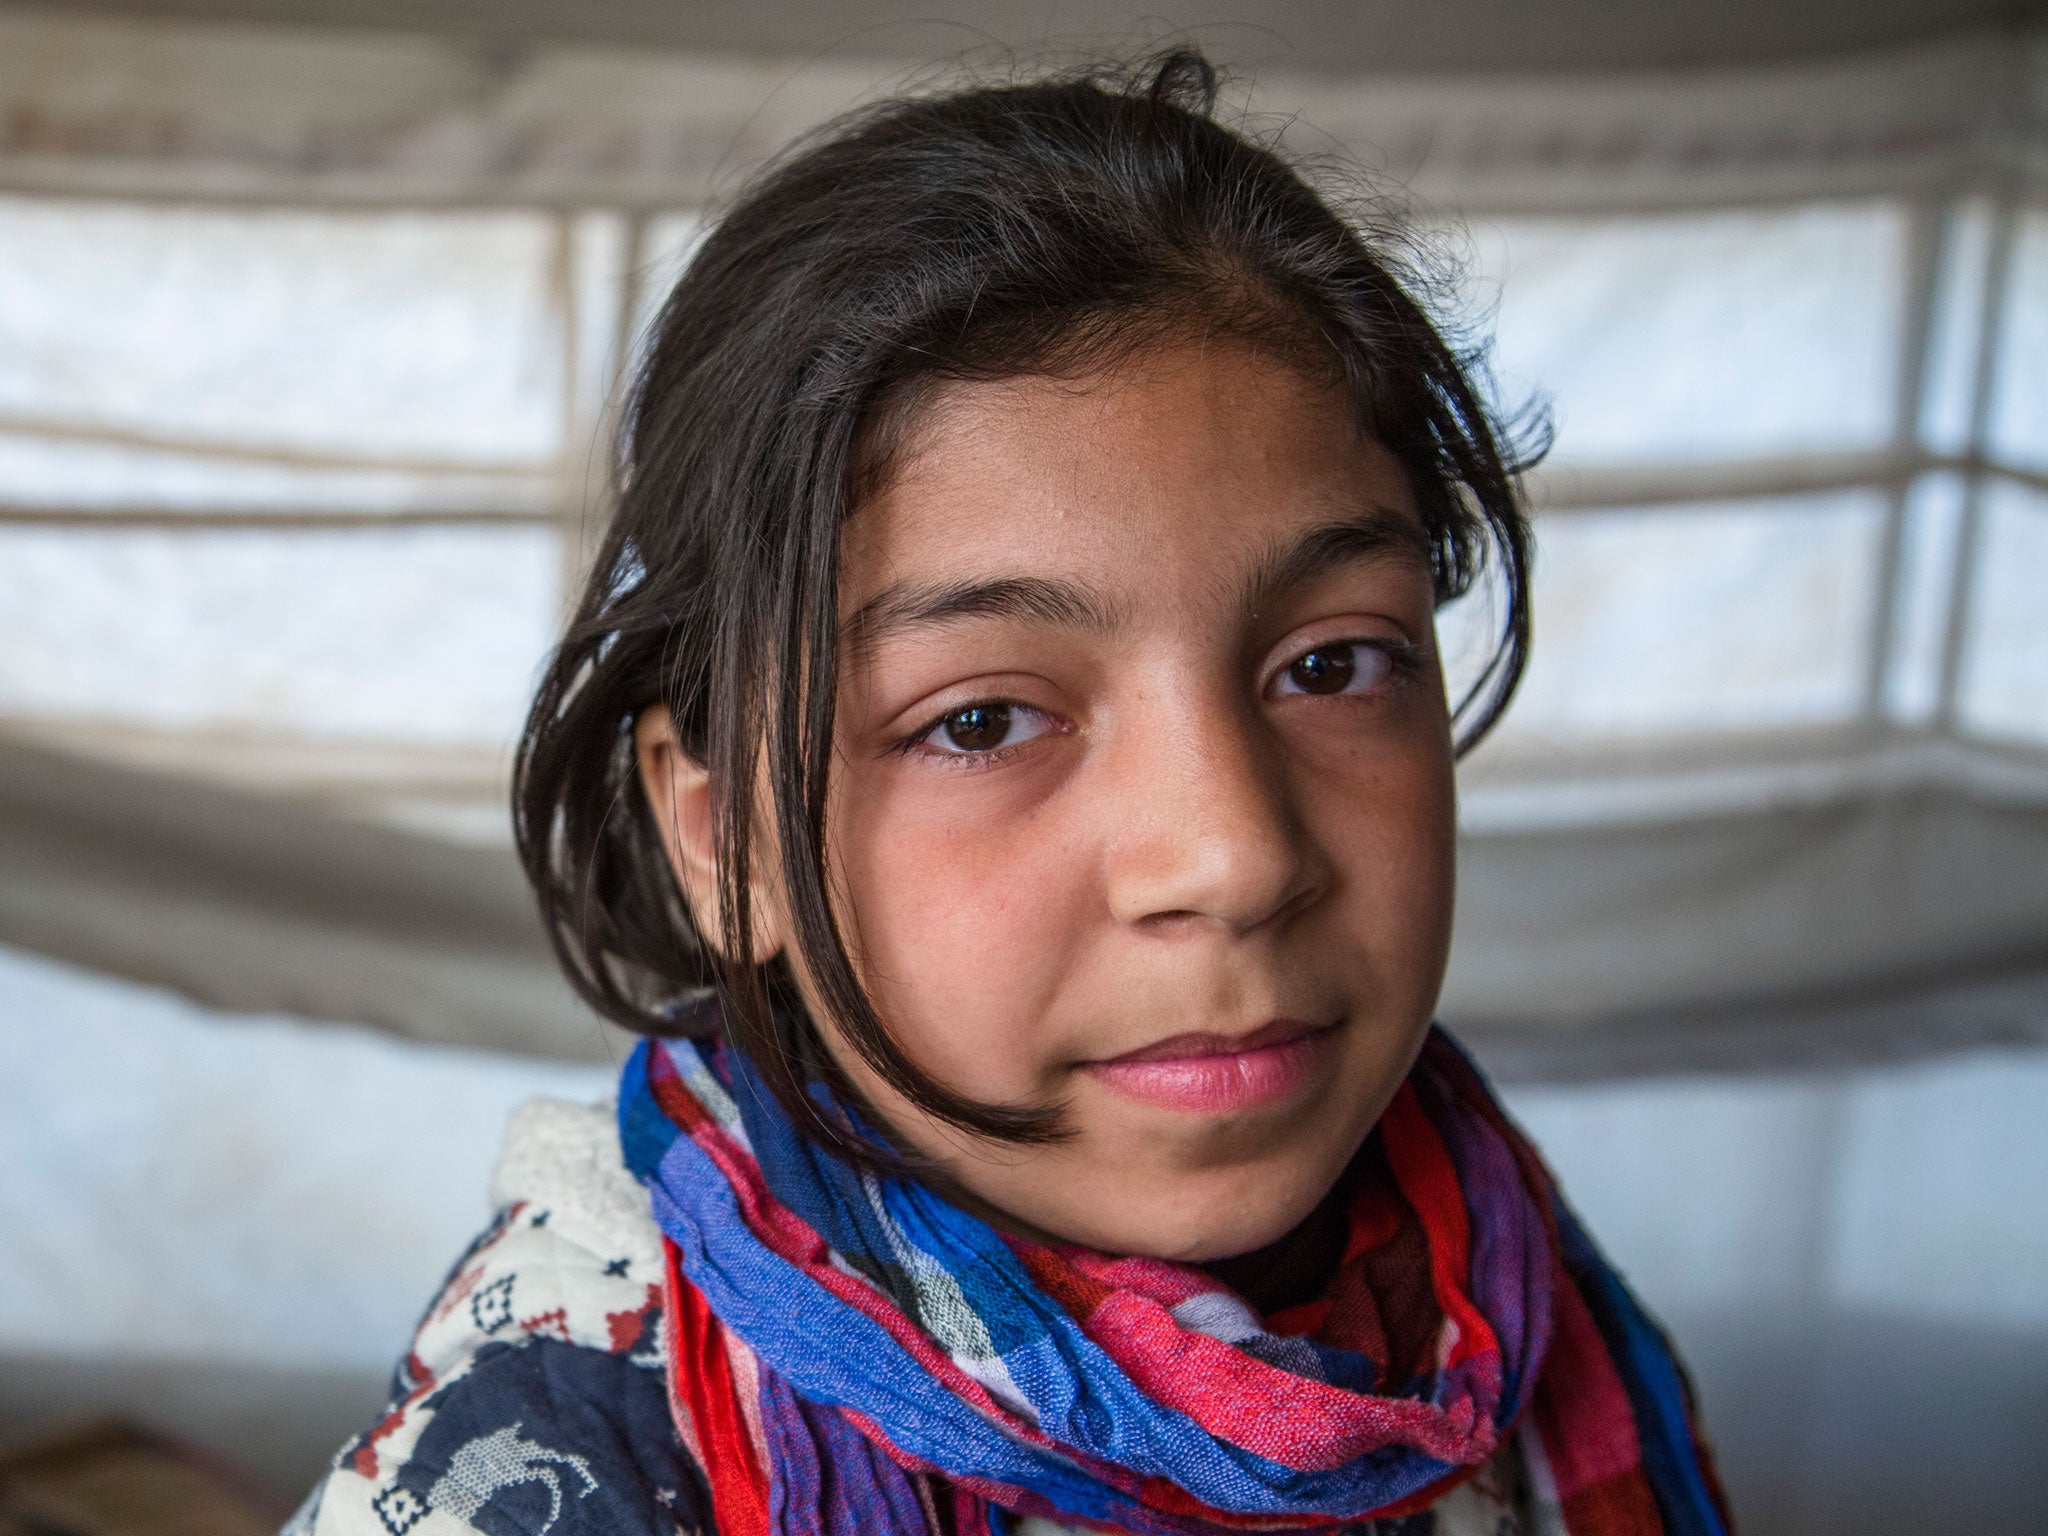 Zainab, 11, from Deir Ezzor, in her family's tent in Syria's al-Hol refugee camp